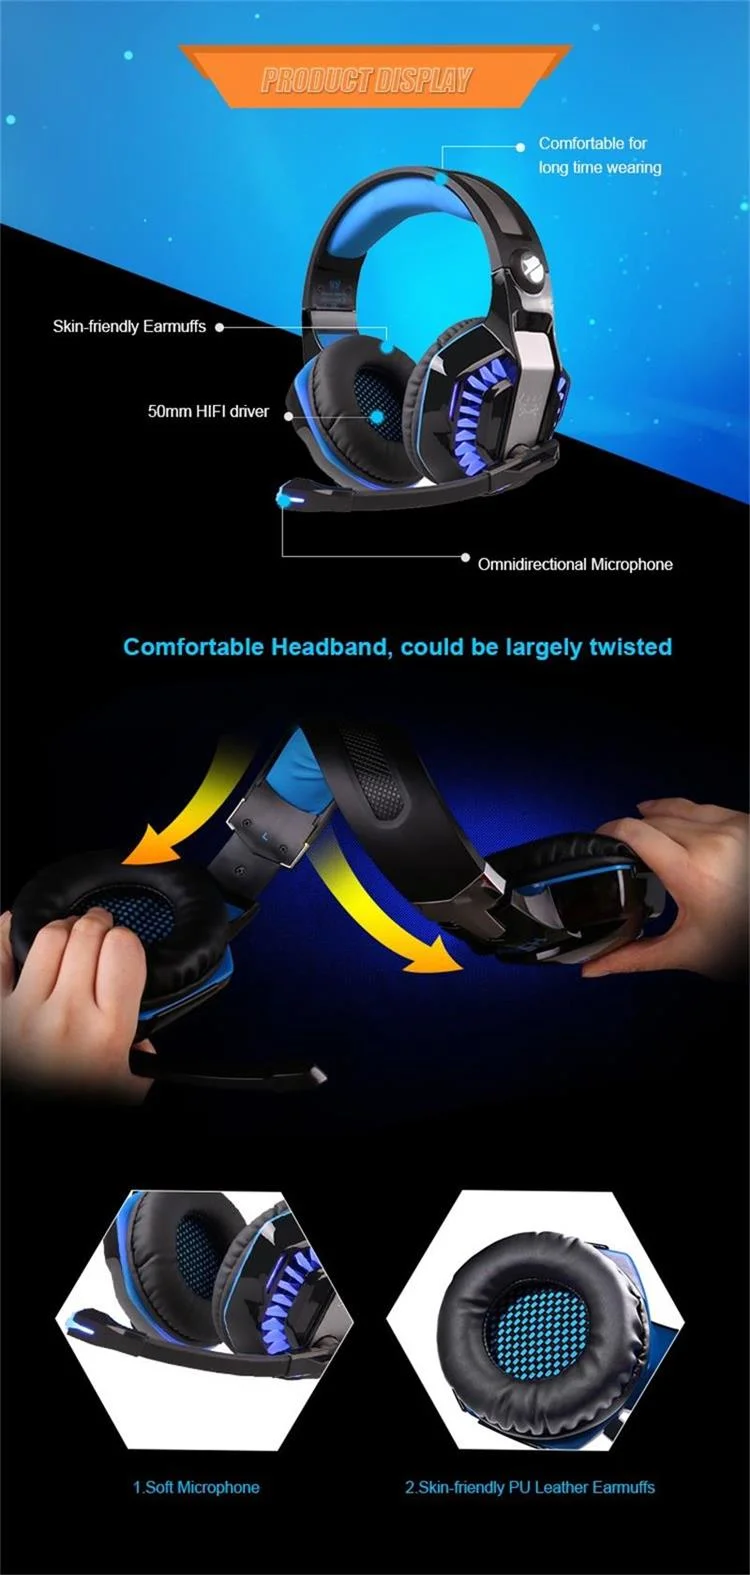 Gaming Headset Gaming Headphone with Mic LED Light for PC Gamer Best PC PS4 7.1 G2000